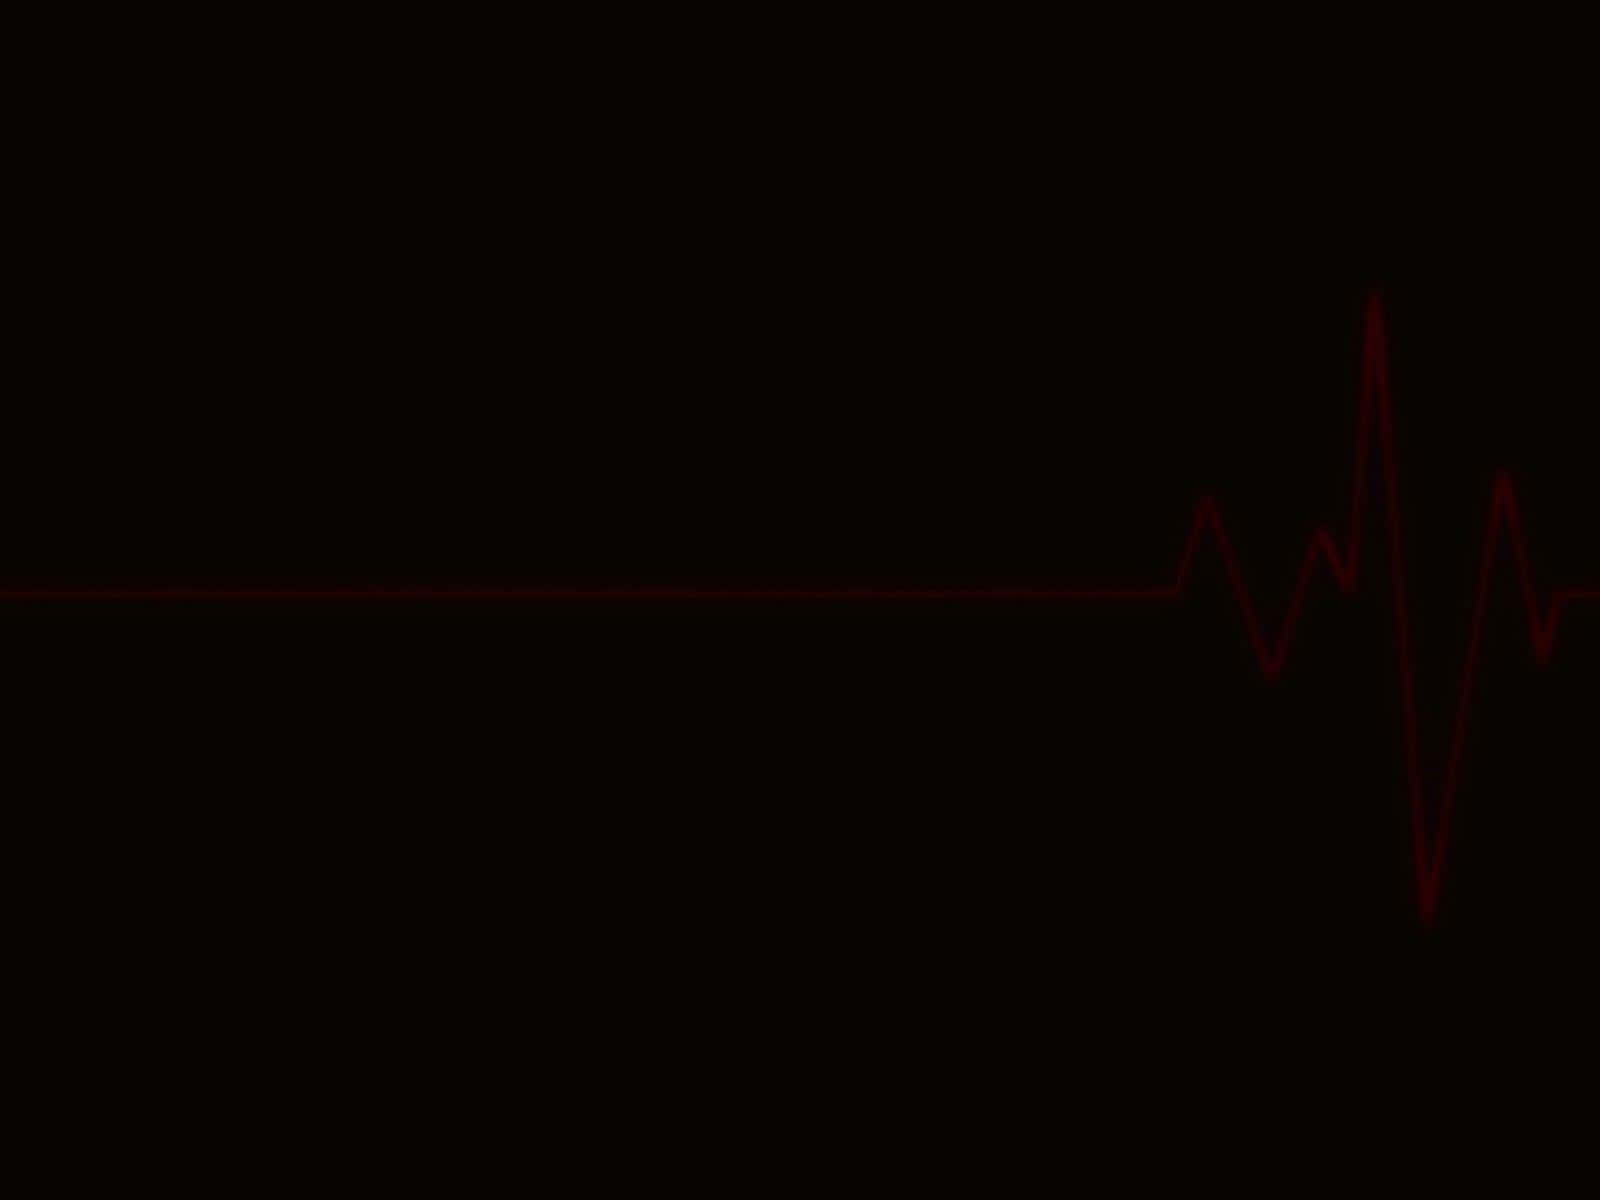 Heart Rate Pulsation on Monitor Screen Wallpaper